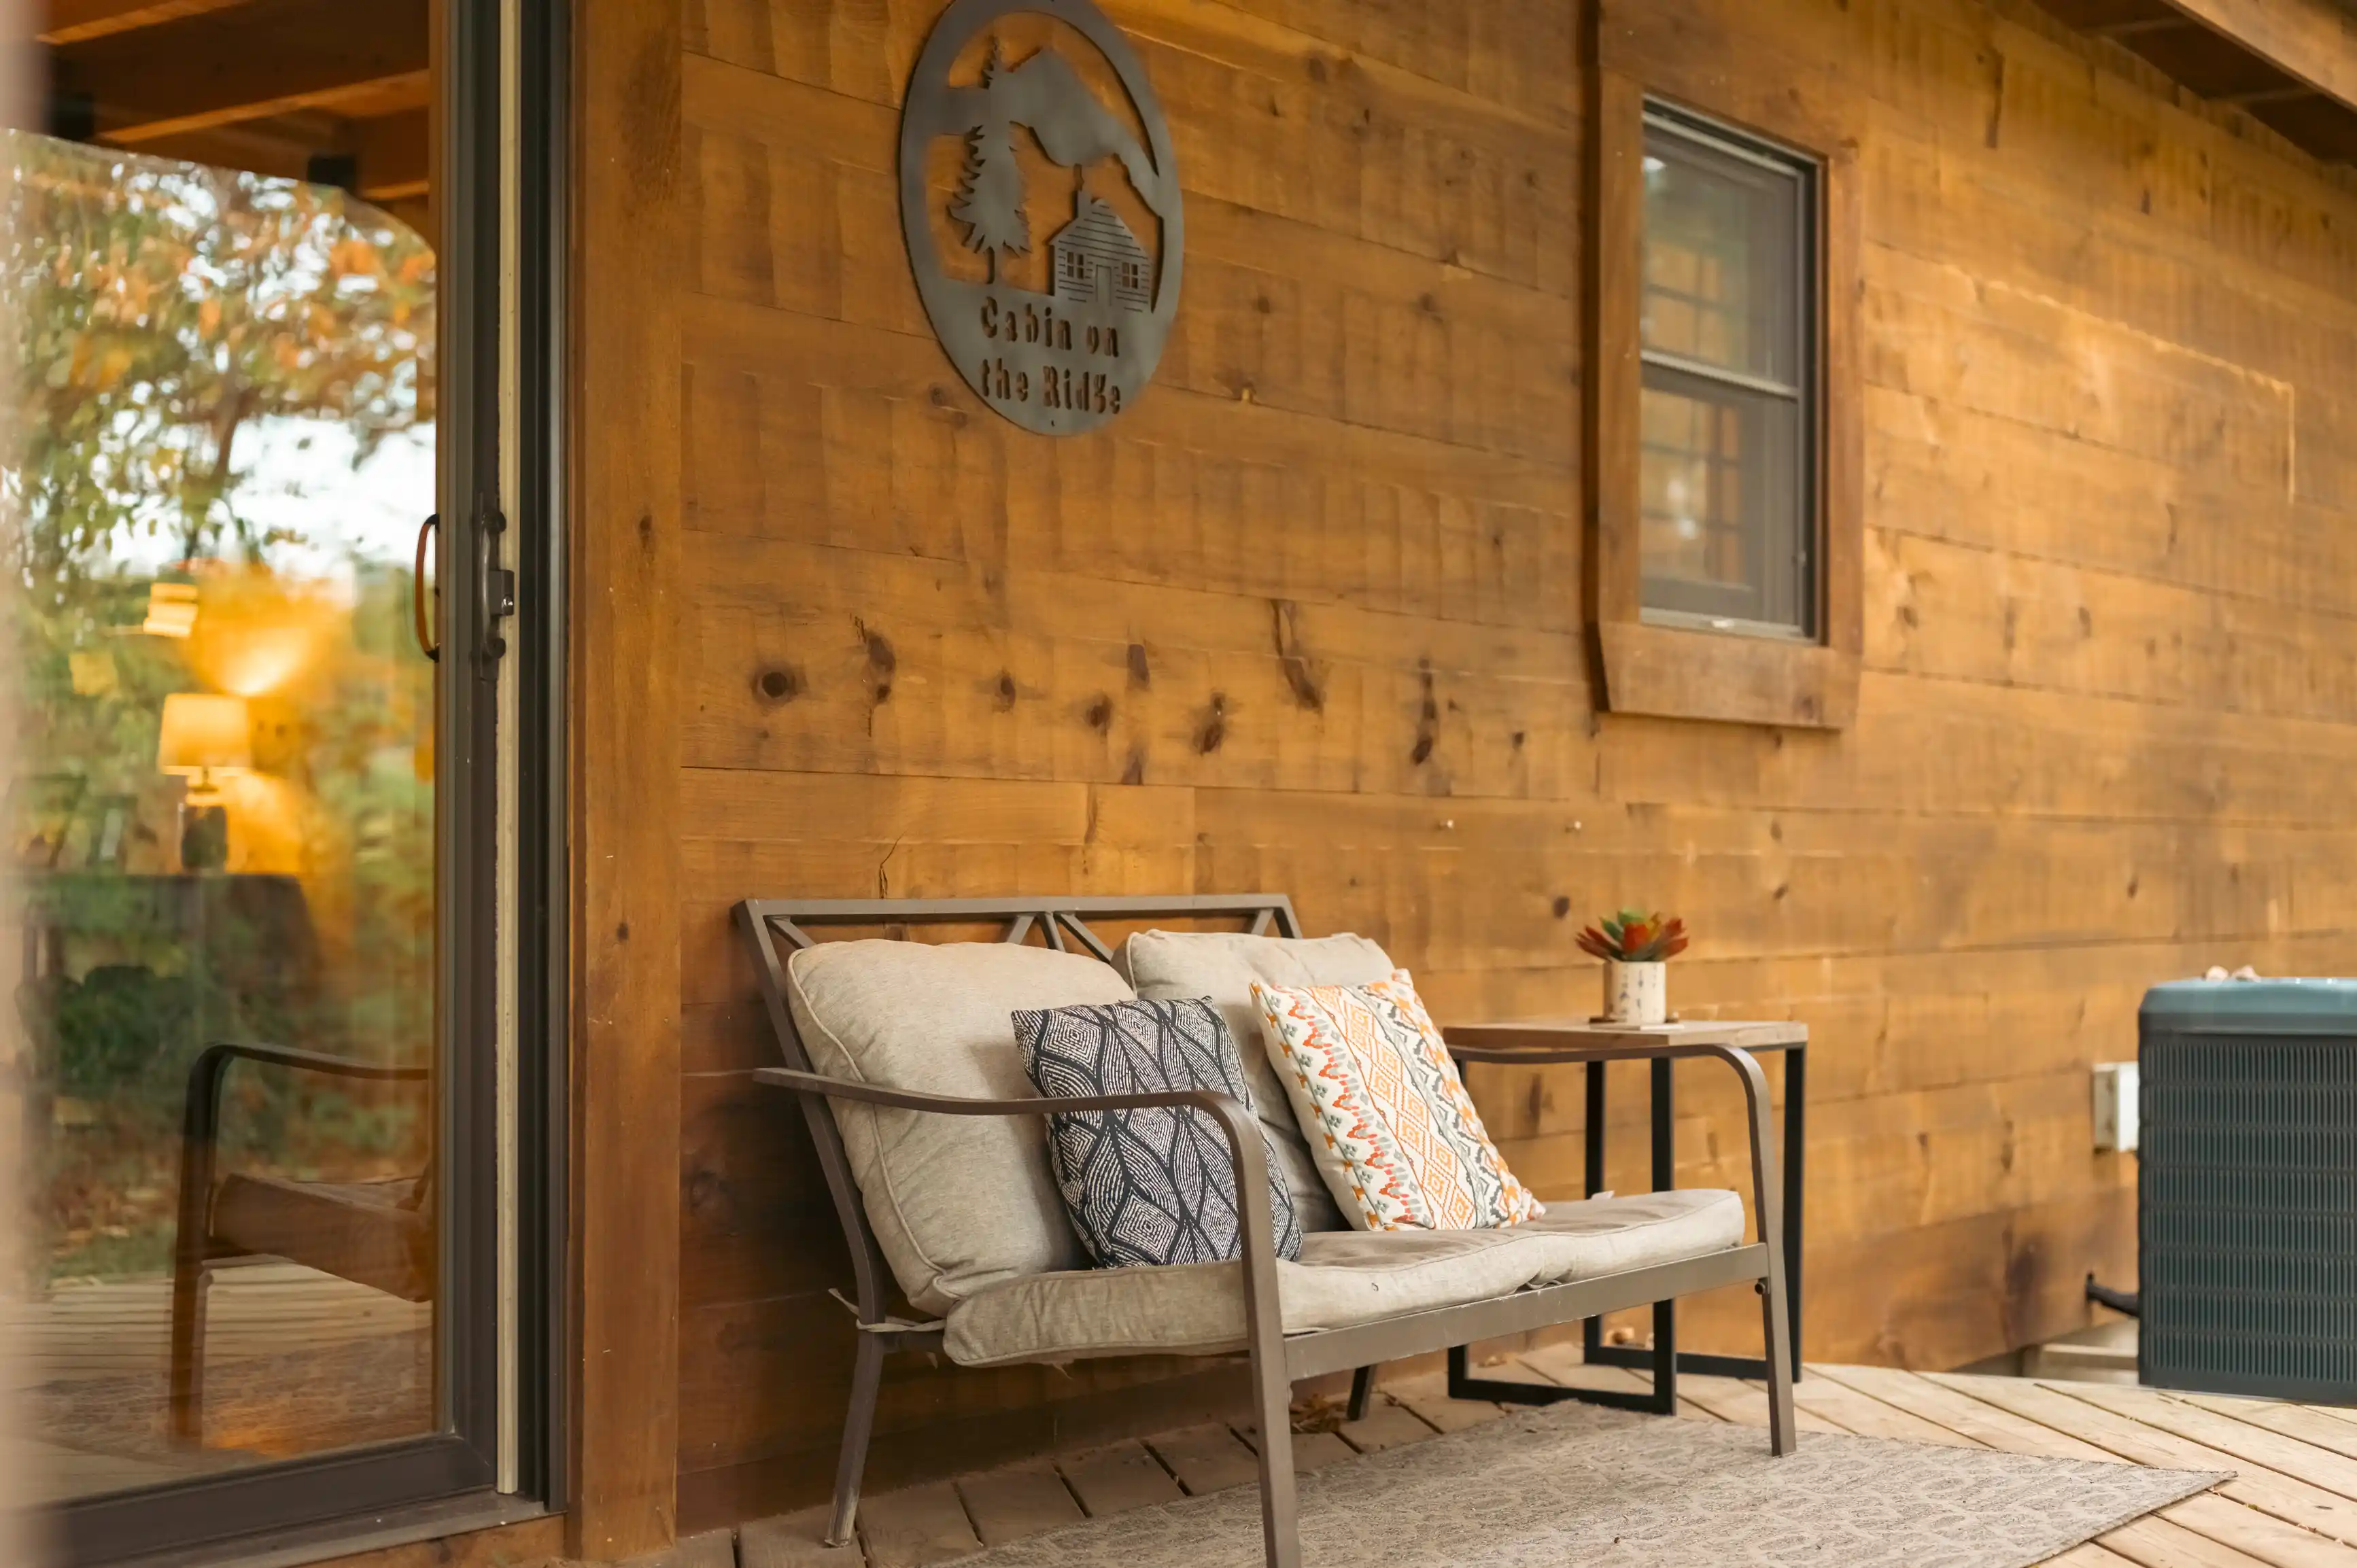 A cozy wooden cabin's porch with a metal bench, decorative pillows, and a sign that reads "Cabin on the Ridge".